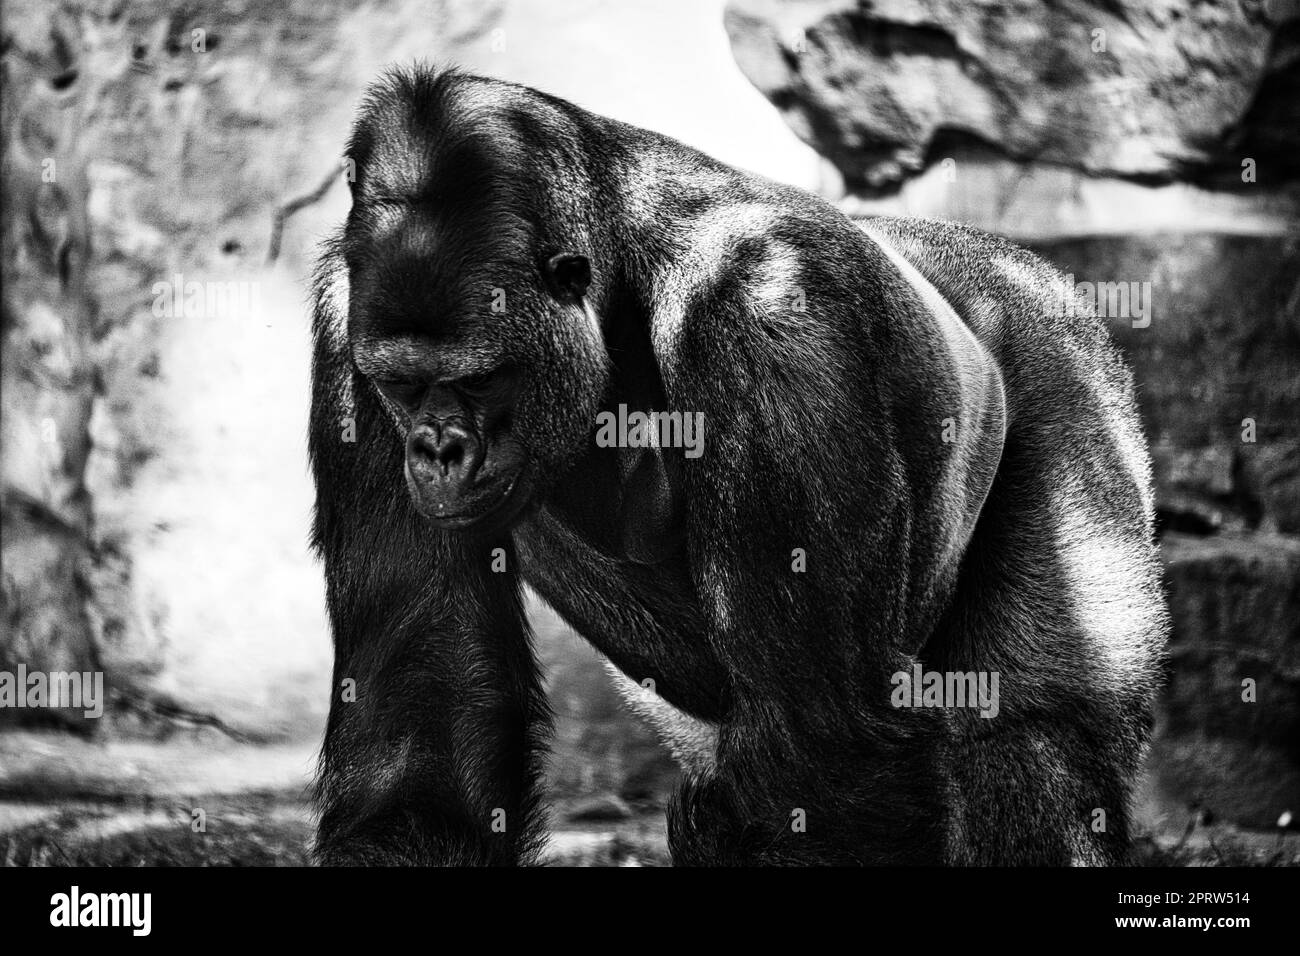 Gorilla, Silver back. The herbivorous big ape is impressive and strong. Stock Photo